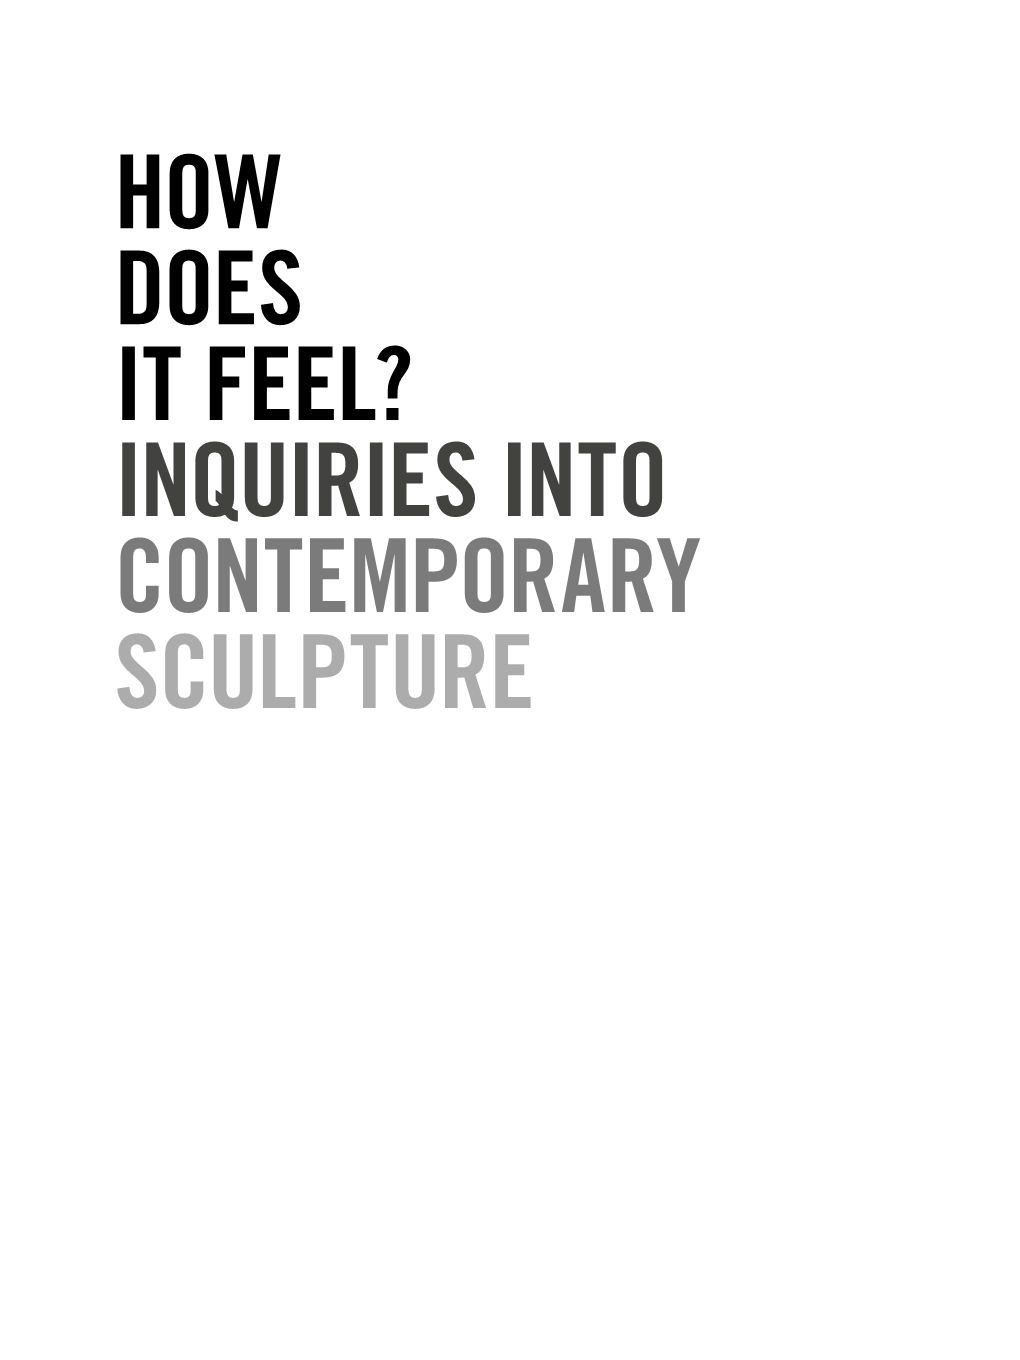 HOW DOES IT FEEL? Inquiries Into Contemporary Sculpture